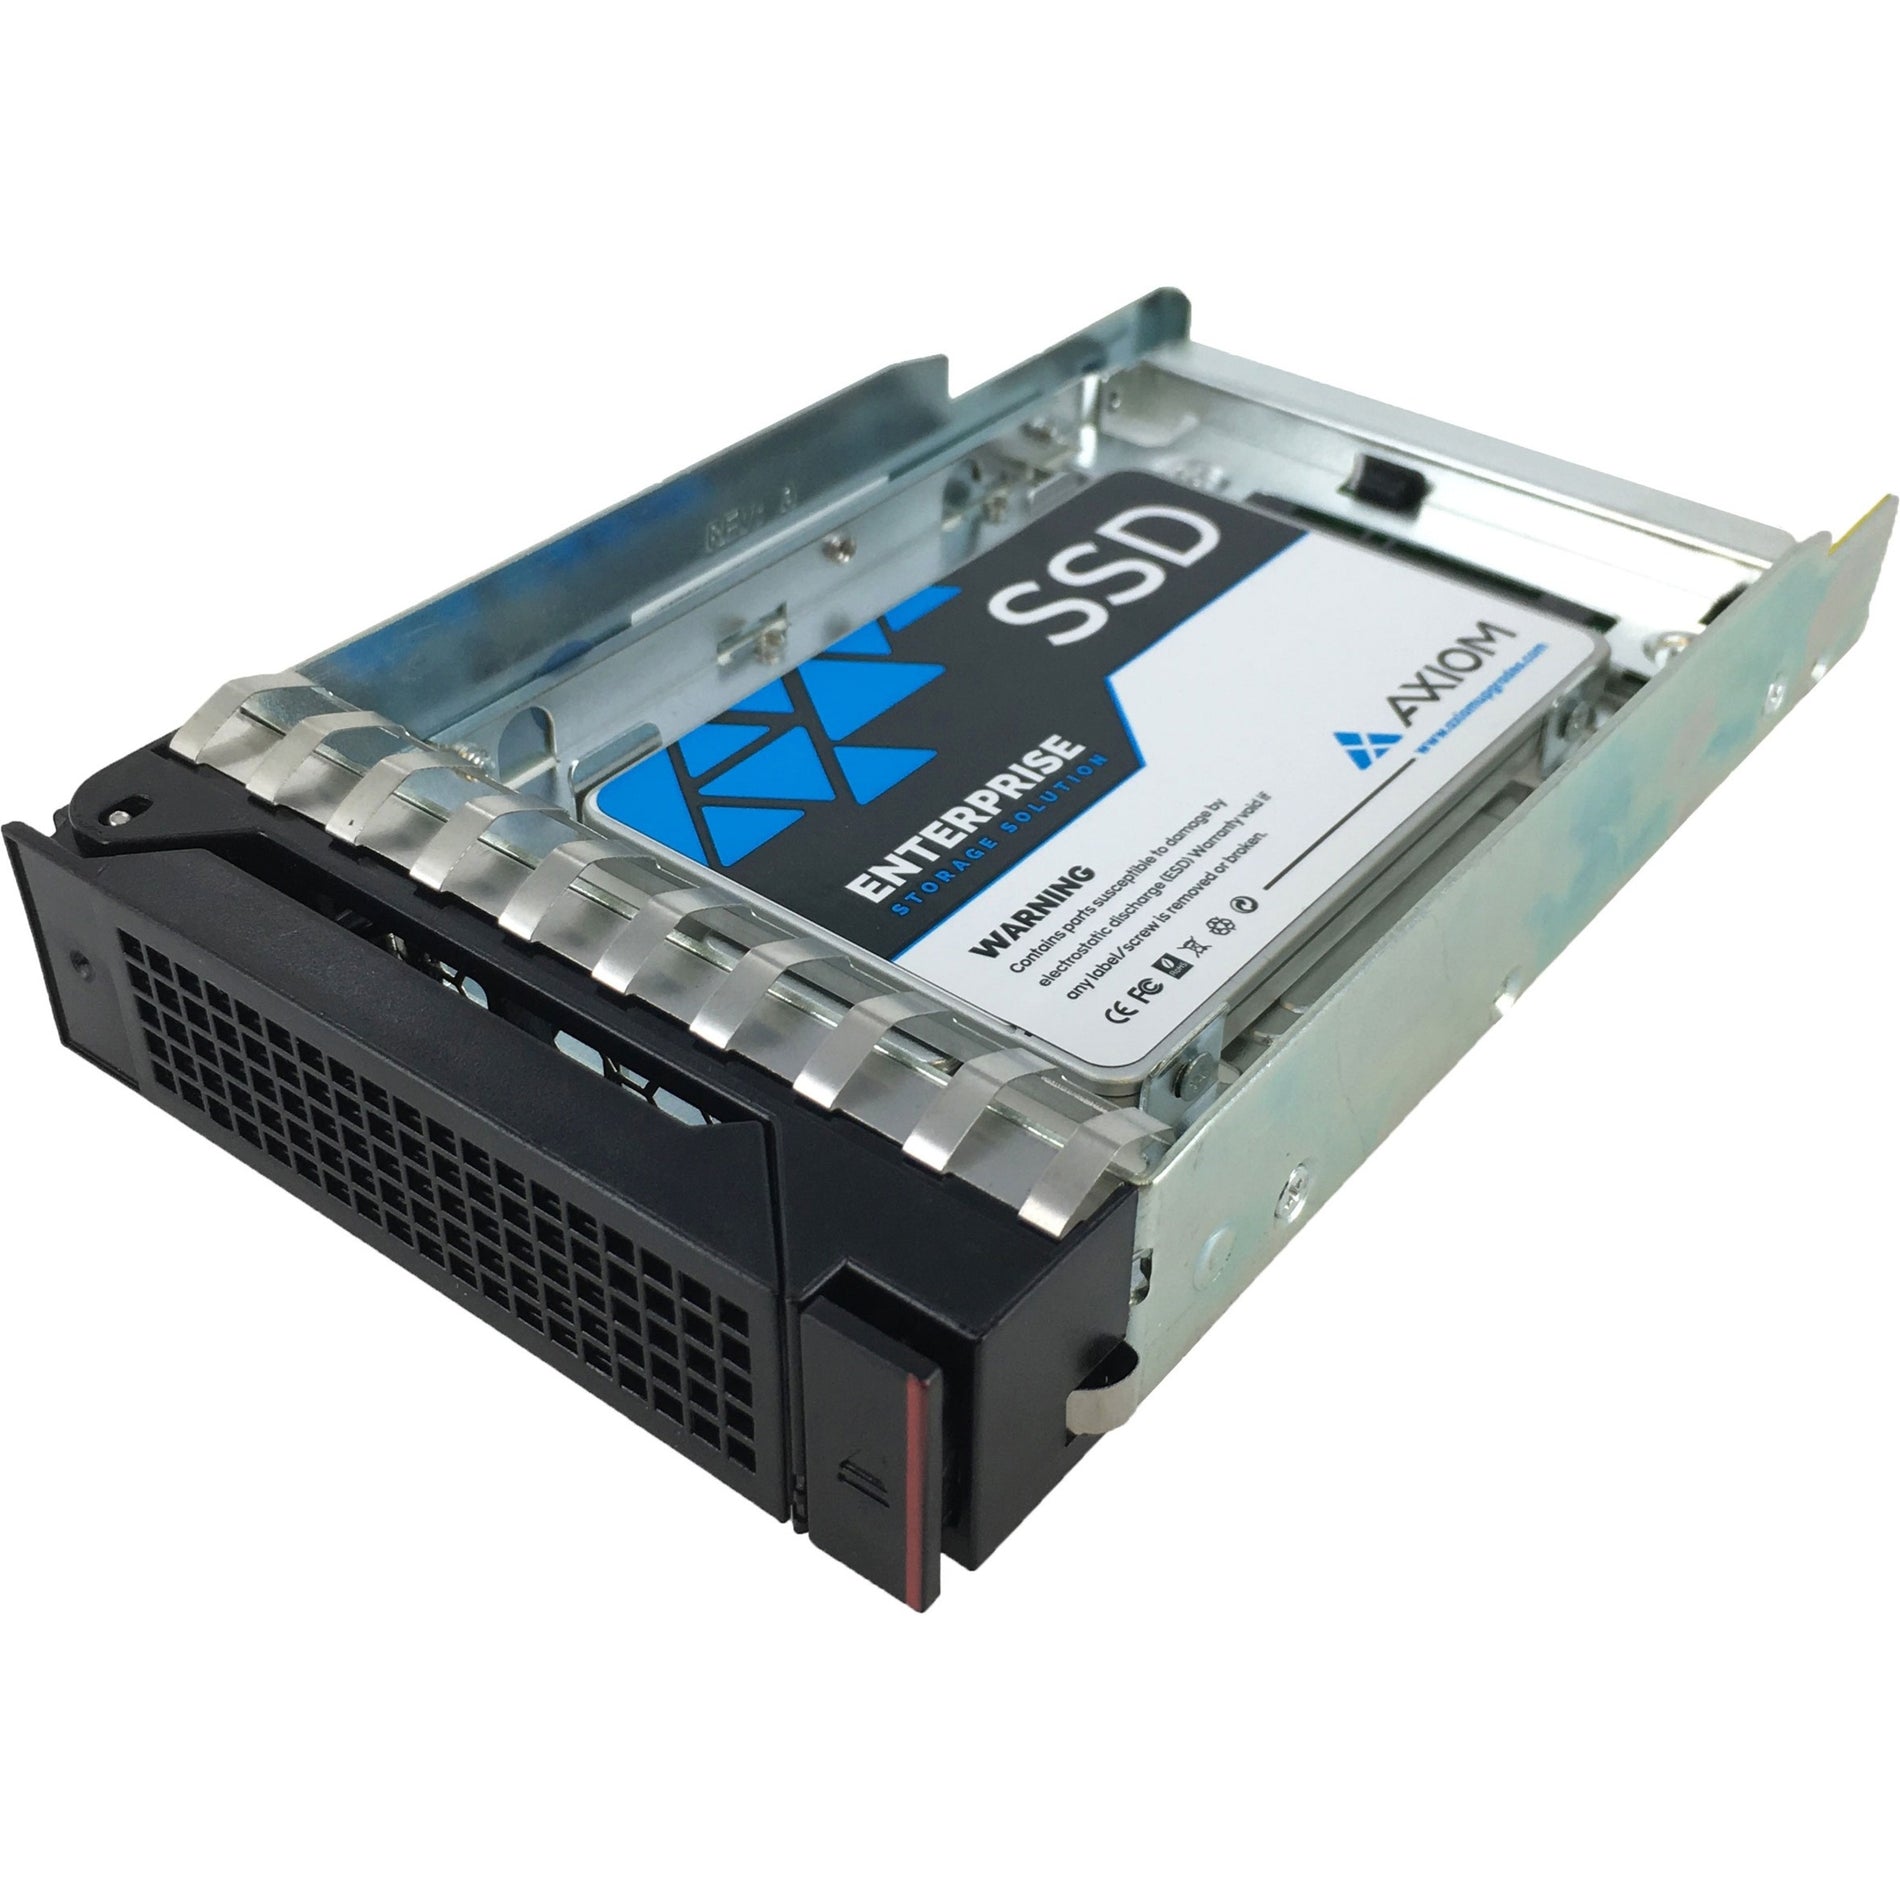 Axiom SSDEP45LD3T8-AX EP450 Solid State Drive, 3.84TB Storage Capacity, 3.5" Form Factor